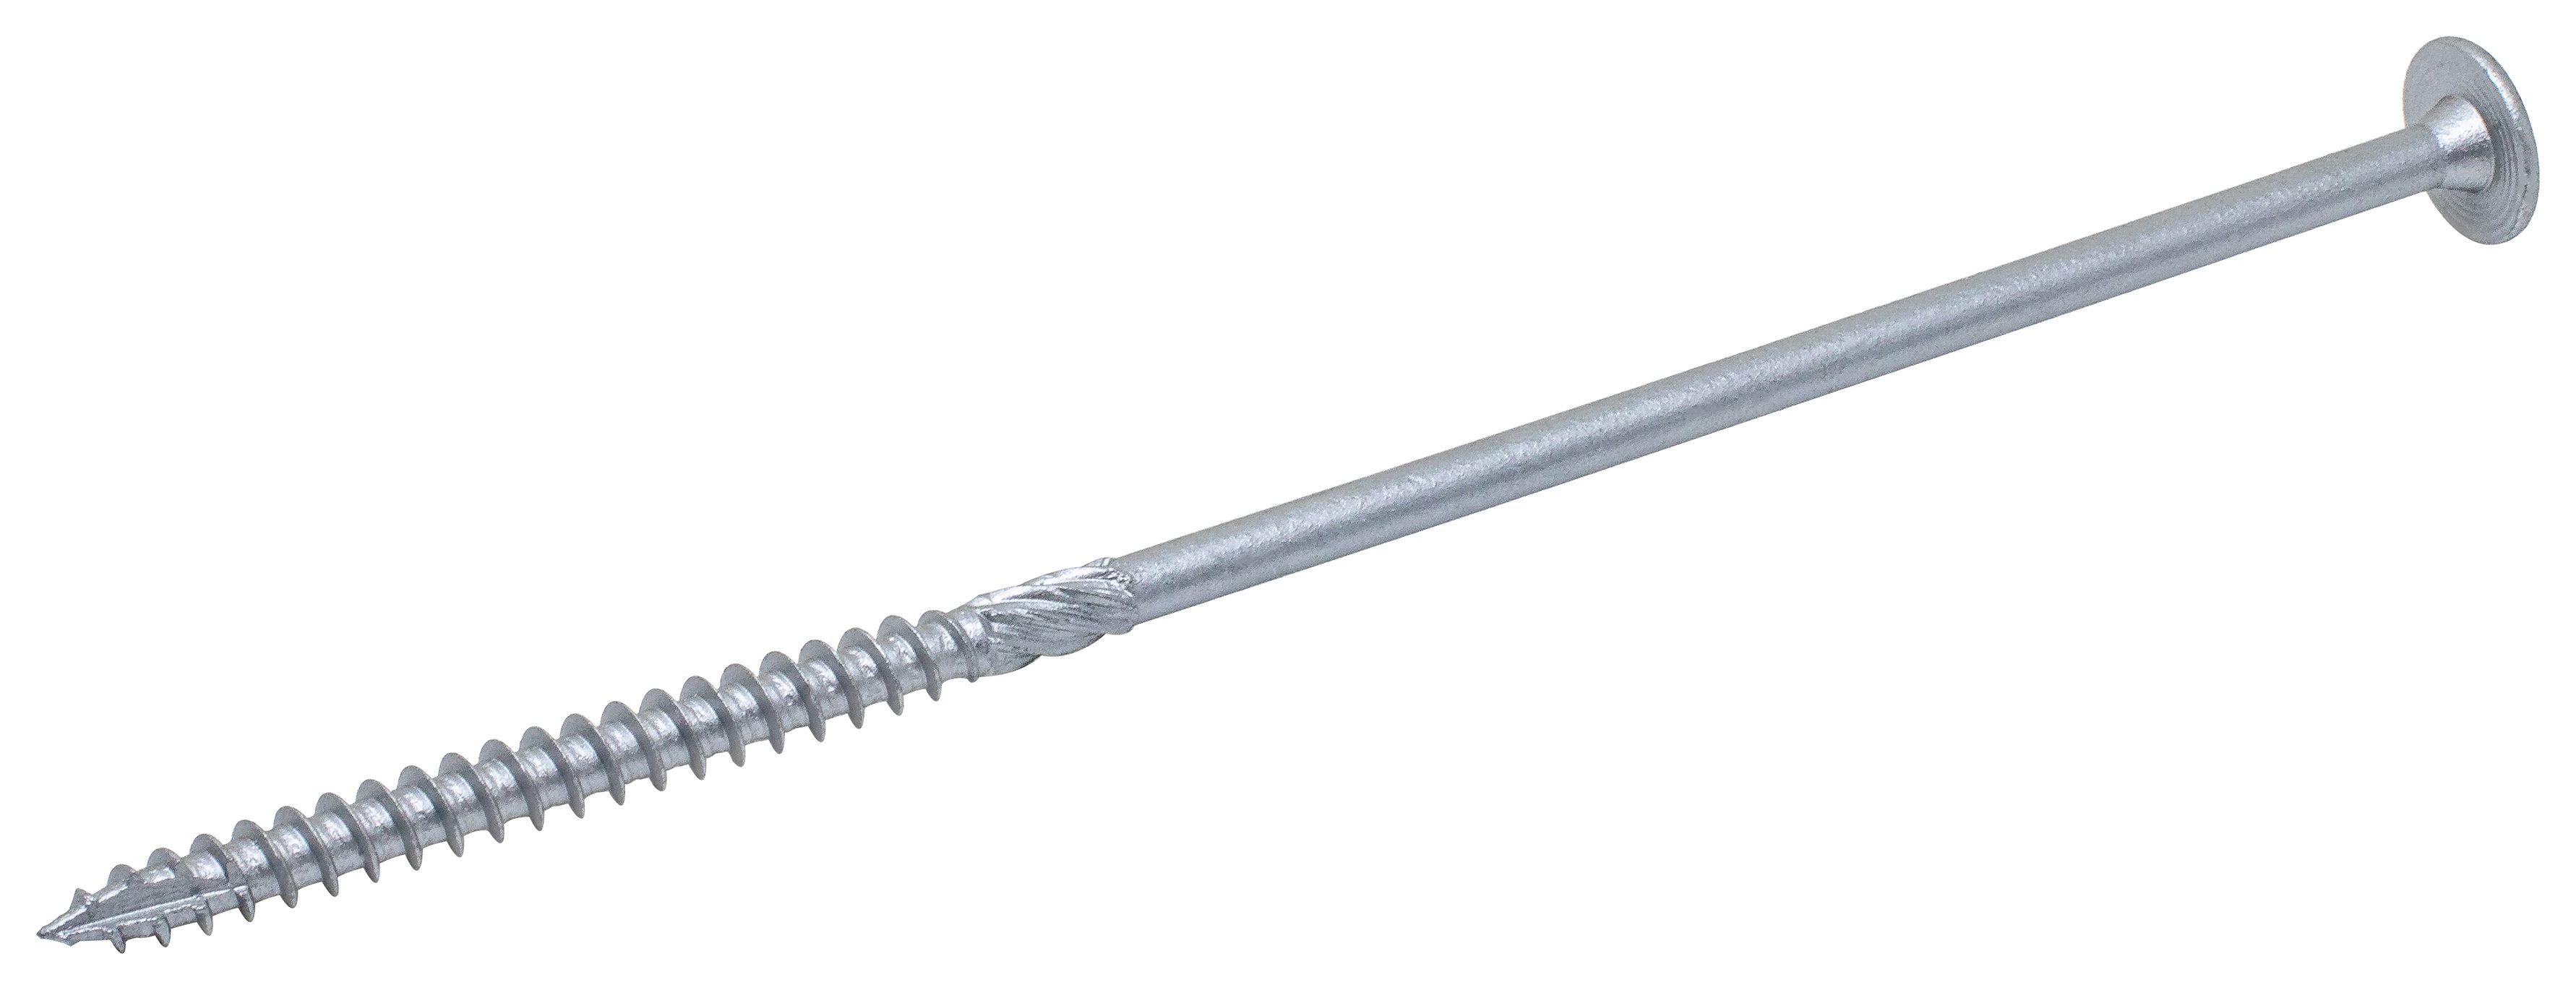 Image of Wickes Timber Drive Tx Washer Head Silver Screw - 7x150mm Pack Of 25